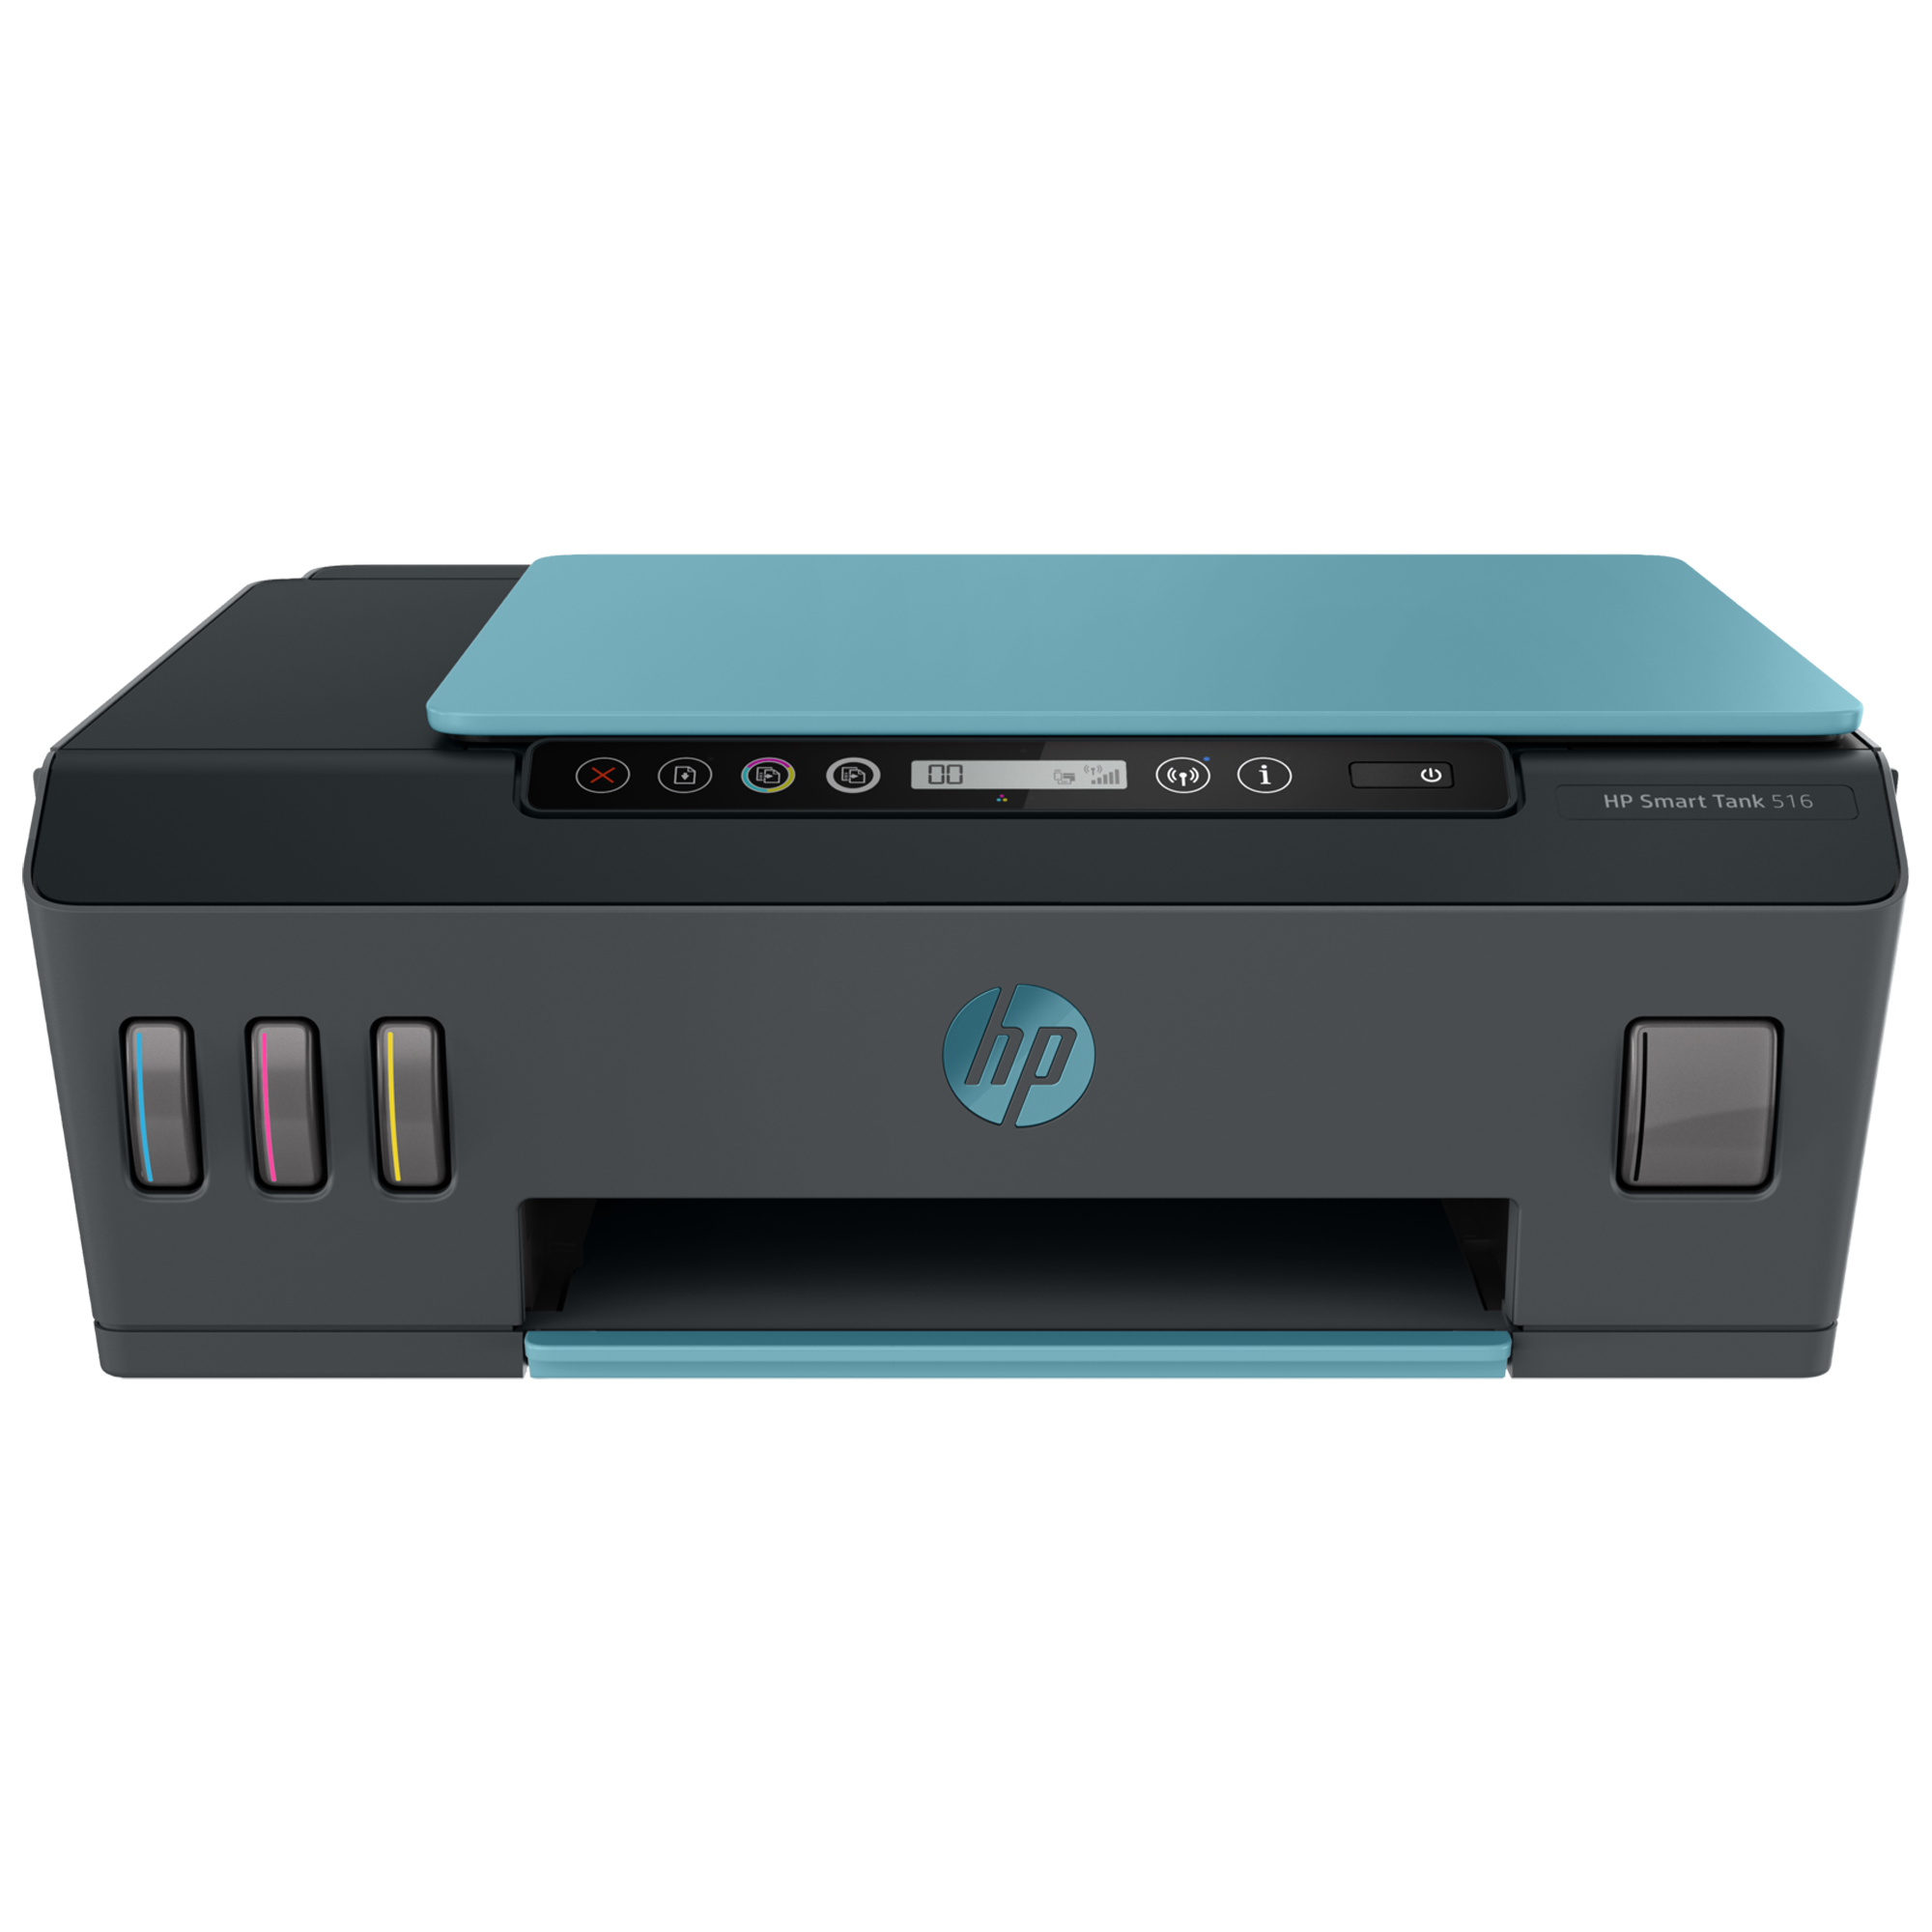 HP Smart Tank 516 Wireless Color All-in-One Inkjet Printer (Borderless Printing, 3YW70A, Cyan)